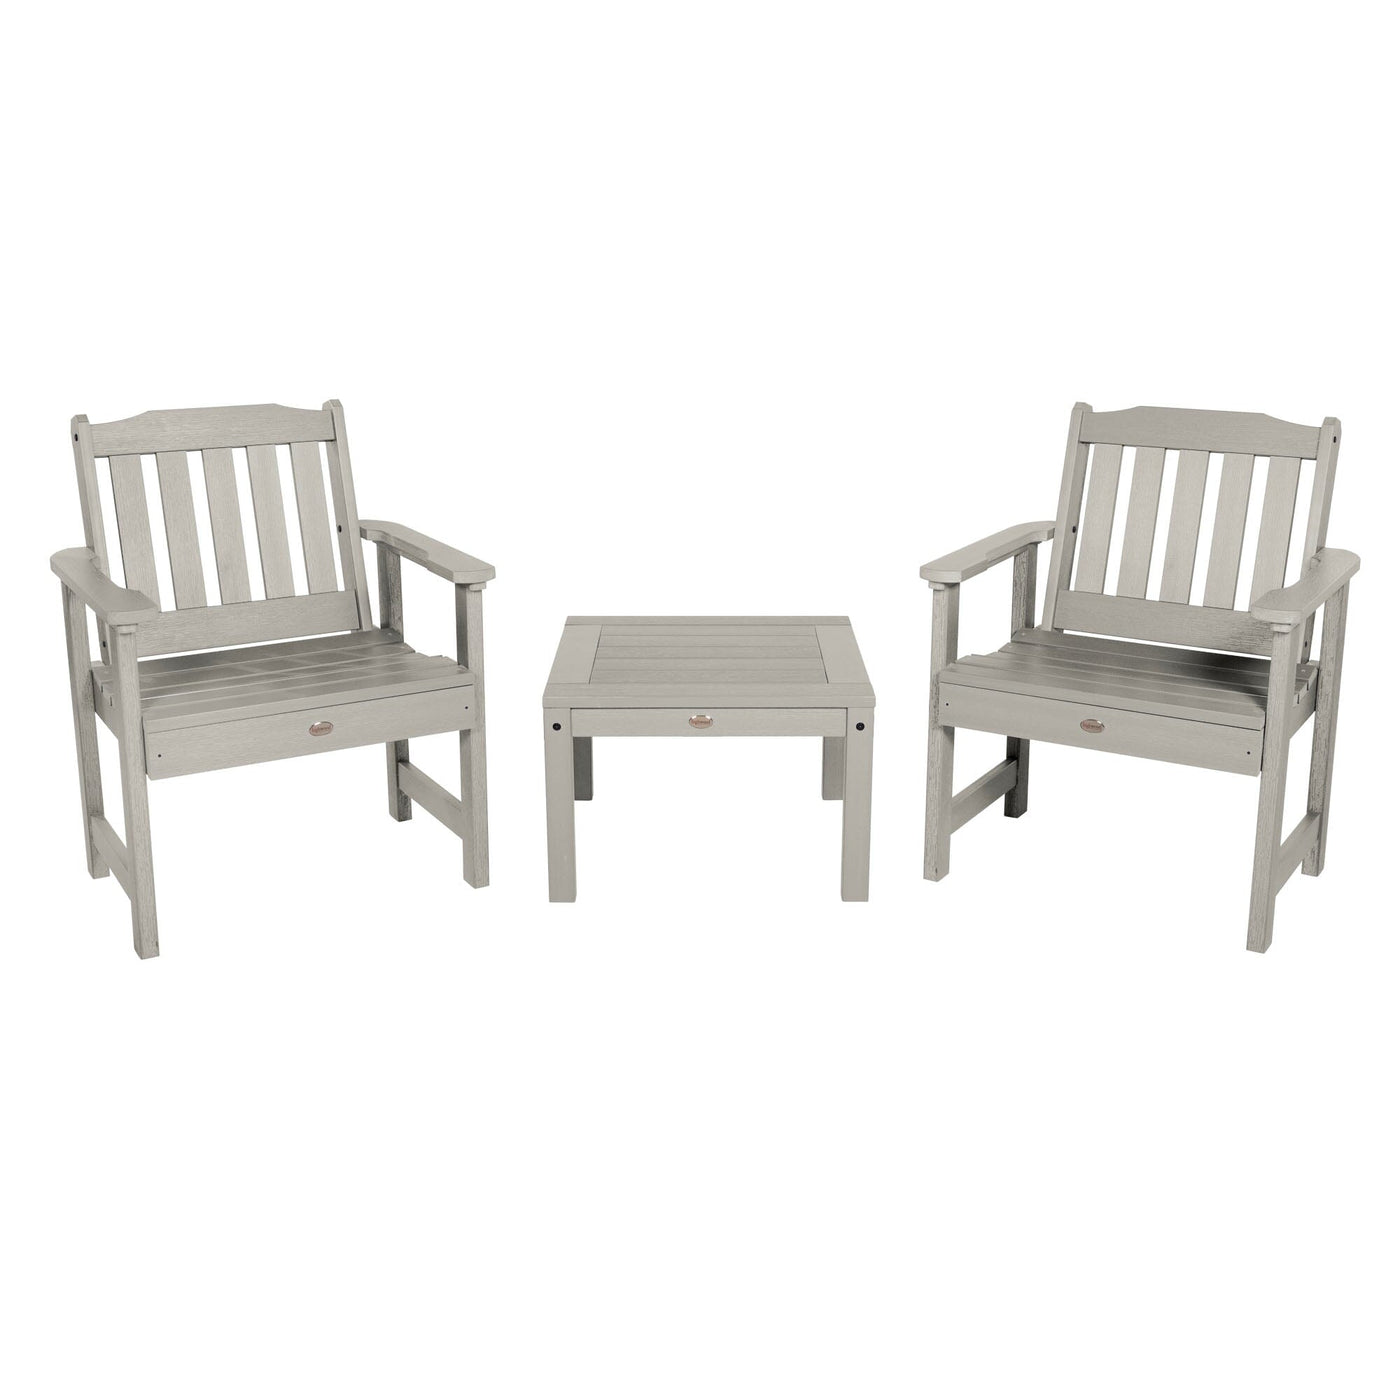 2 Lehigh Garden Chairs with 1 Square Side Table Kitted Sets Highwood USA Harbor Gray 